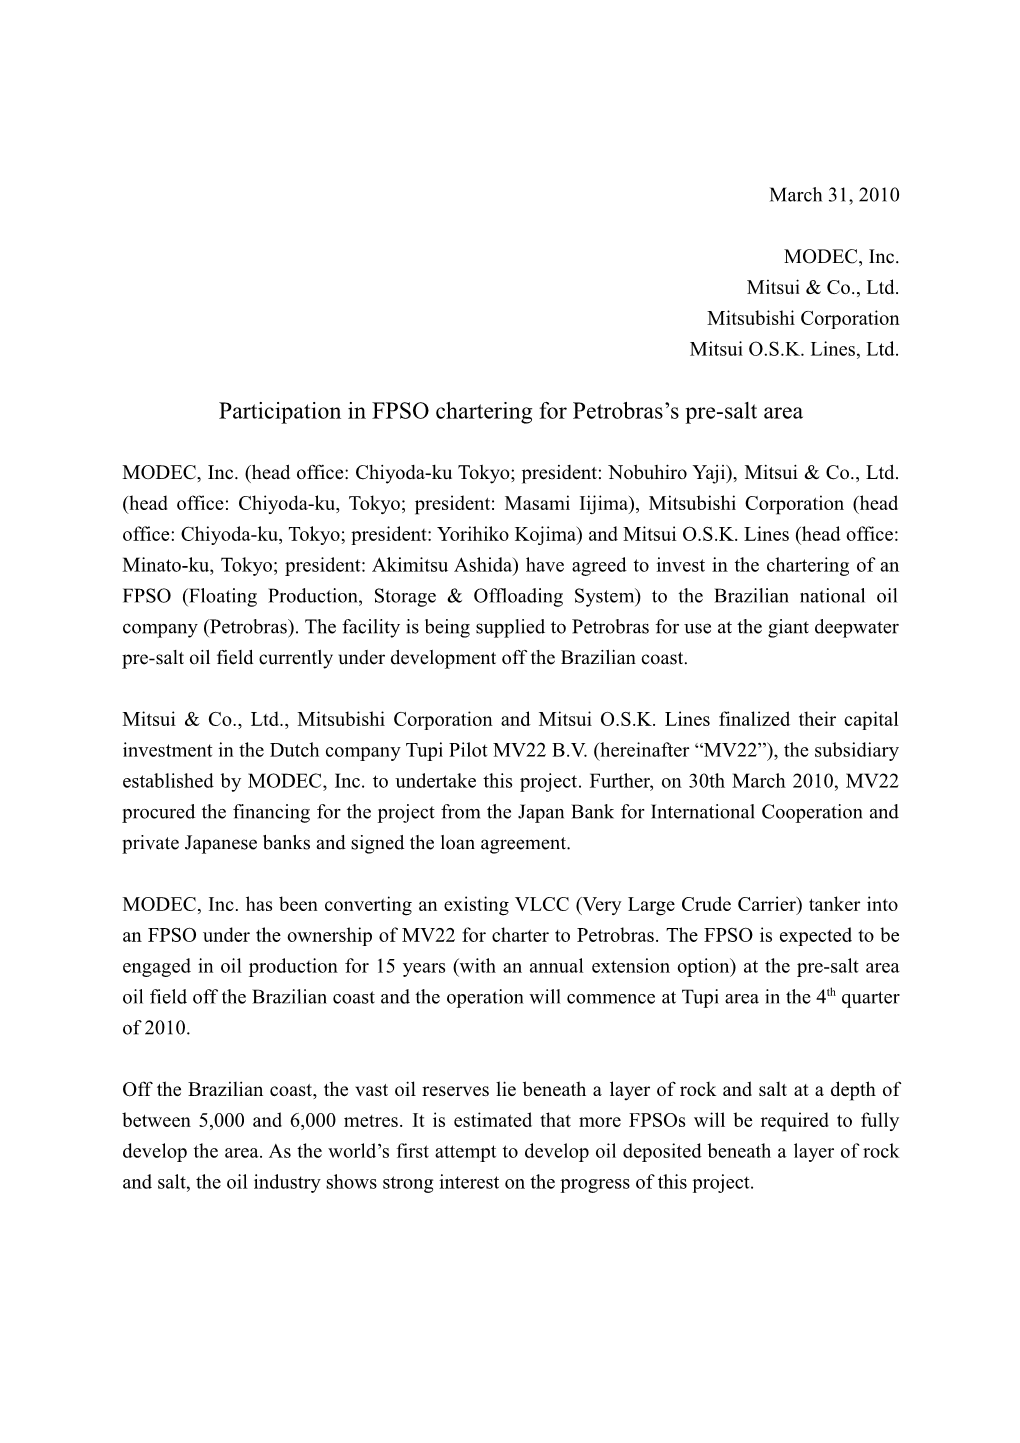 Participation in FPSO Chartering for Petrobras S Pre-Salt Area